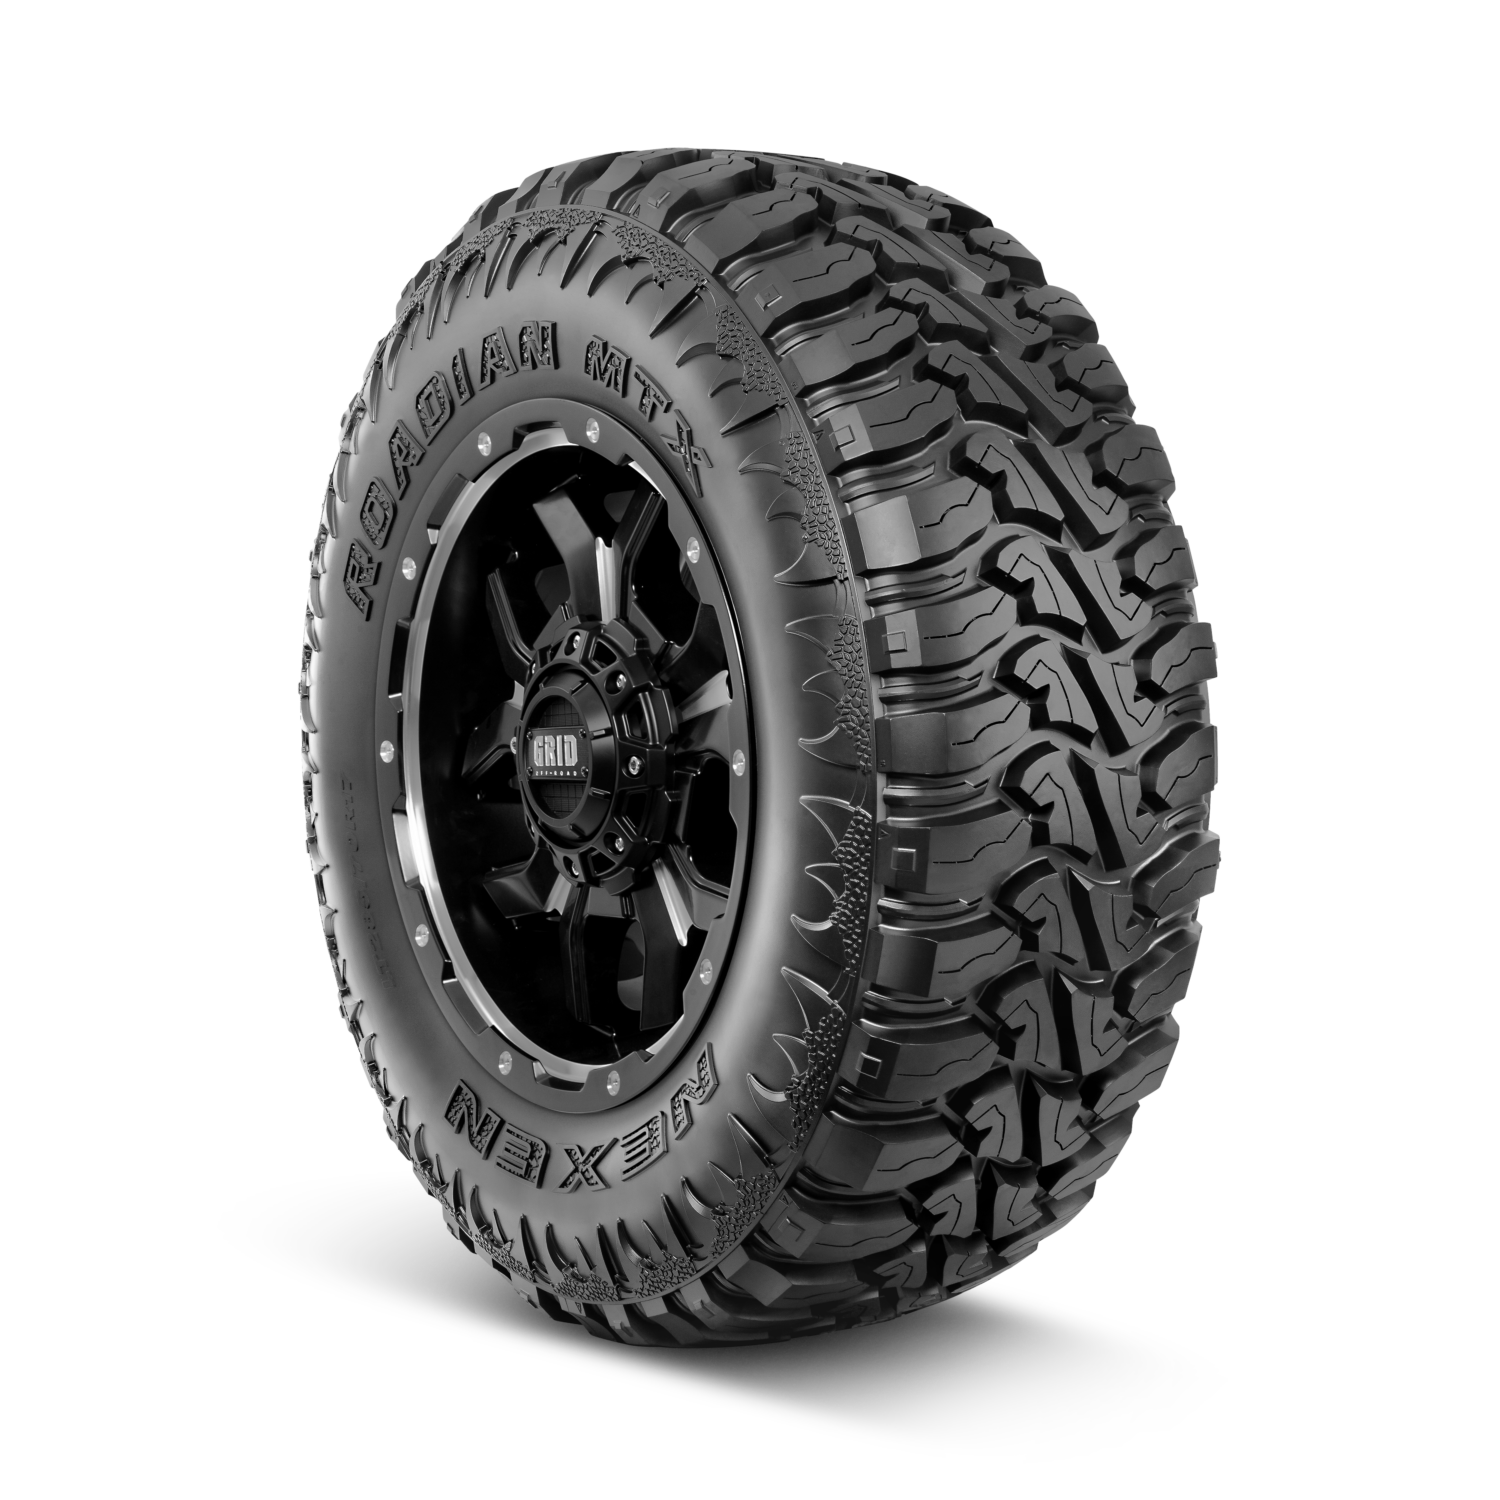 Angle view of NEXEN Roadian MTX RM7 mud terrain tyre with beast sidewall showing